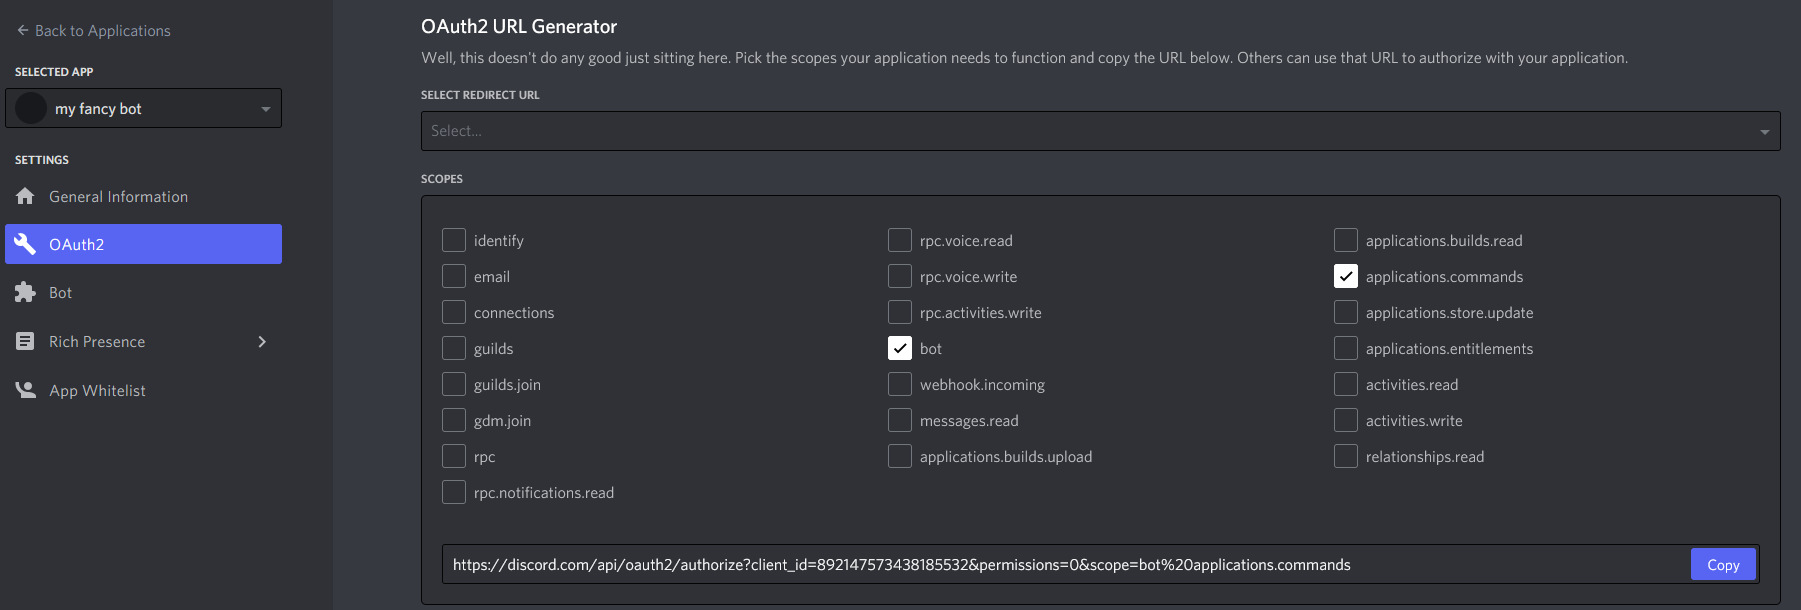 OAuth2 Scopes with bot and application.commands checked